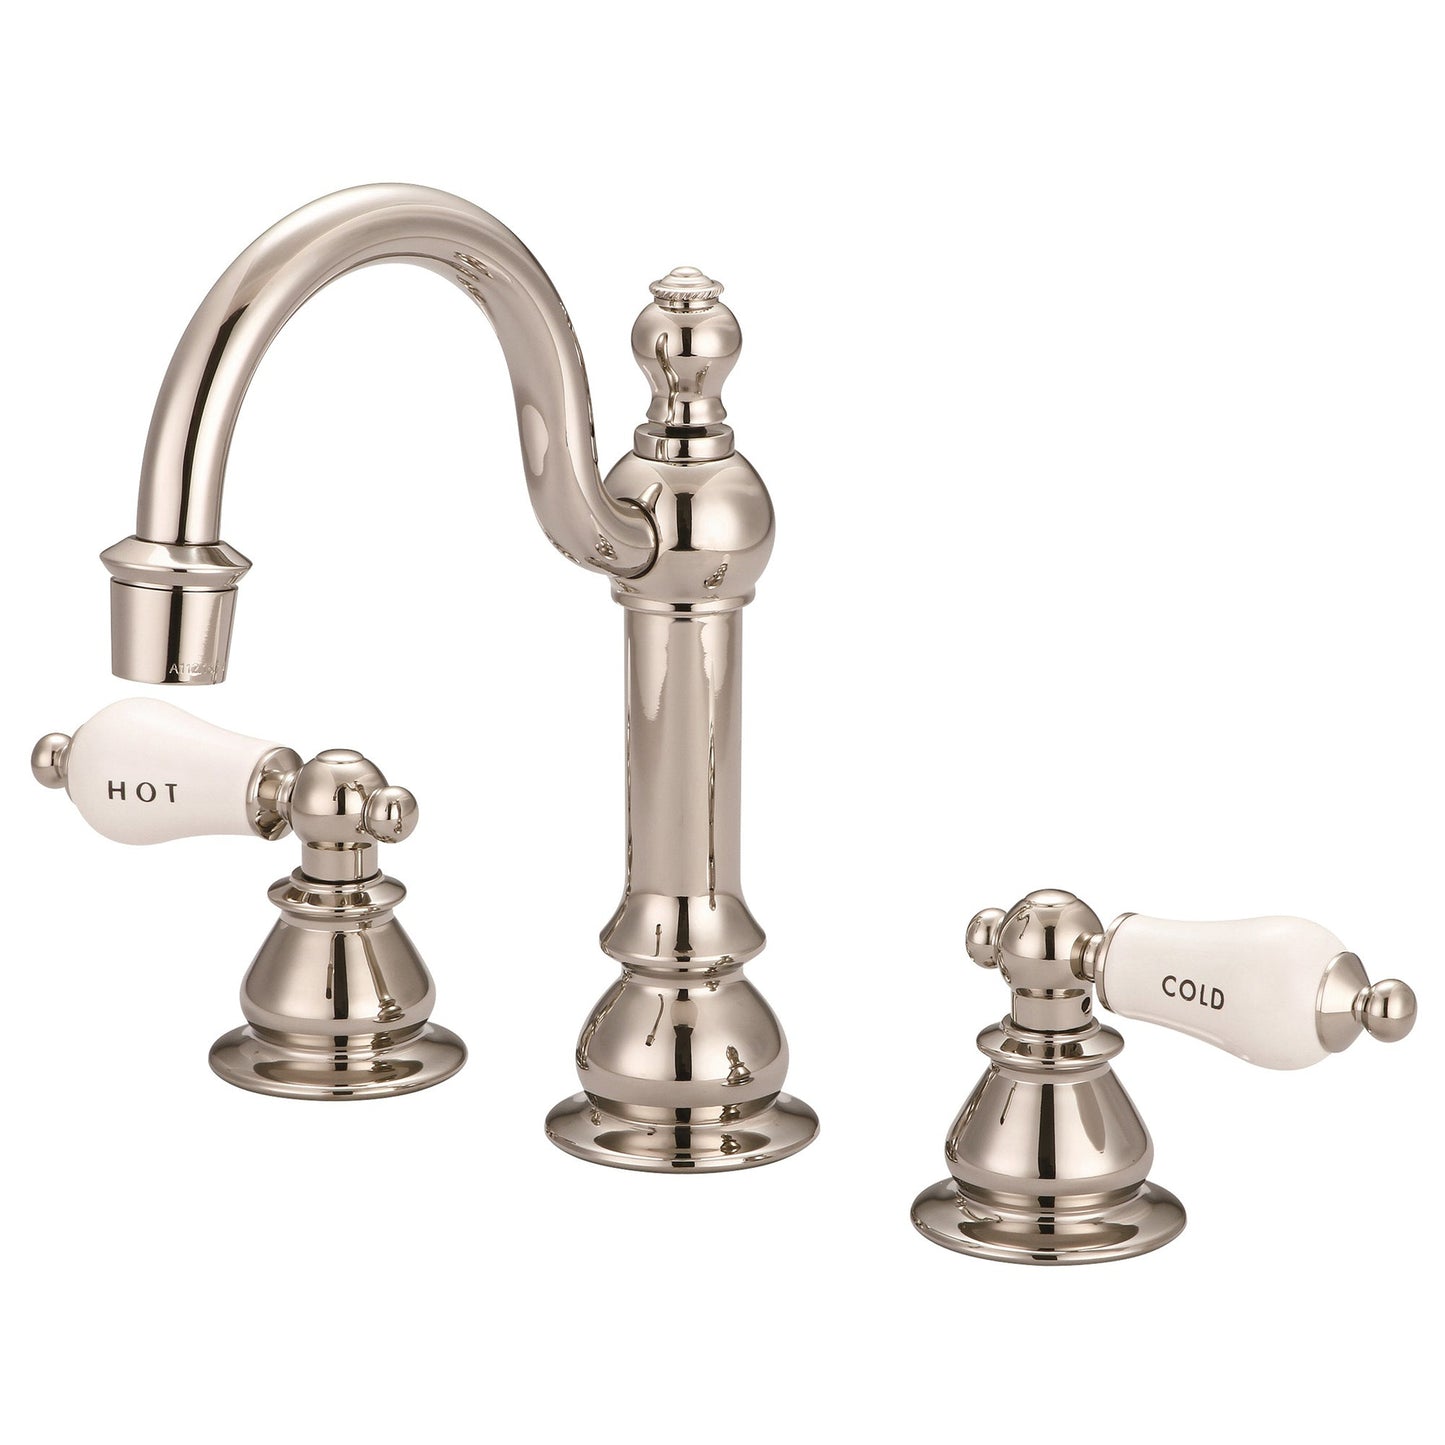 Water Creation American 20th Century Classic Widespread Lavatory F2-0012 8" Ivory Solid Brass Faucet With Pop-Up Drain And Porcelain Lever Handles, Hot And Cold Labels Included